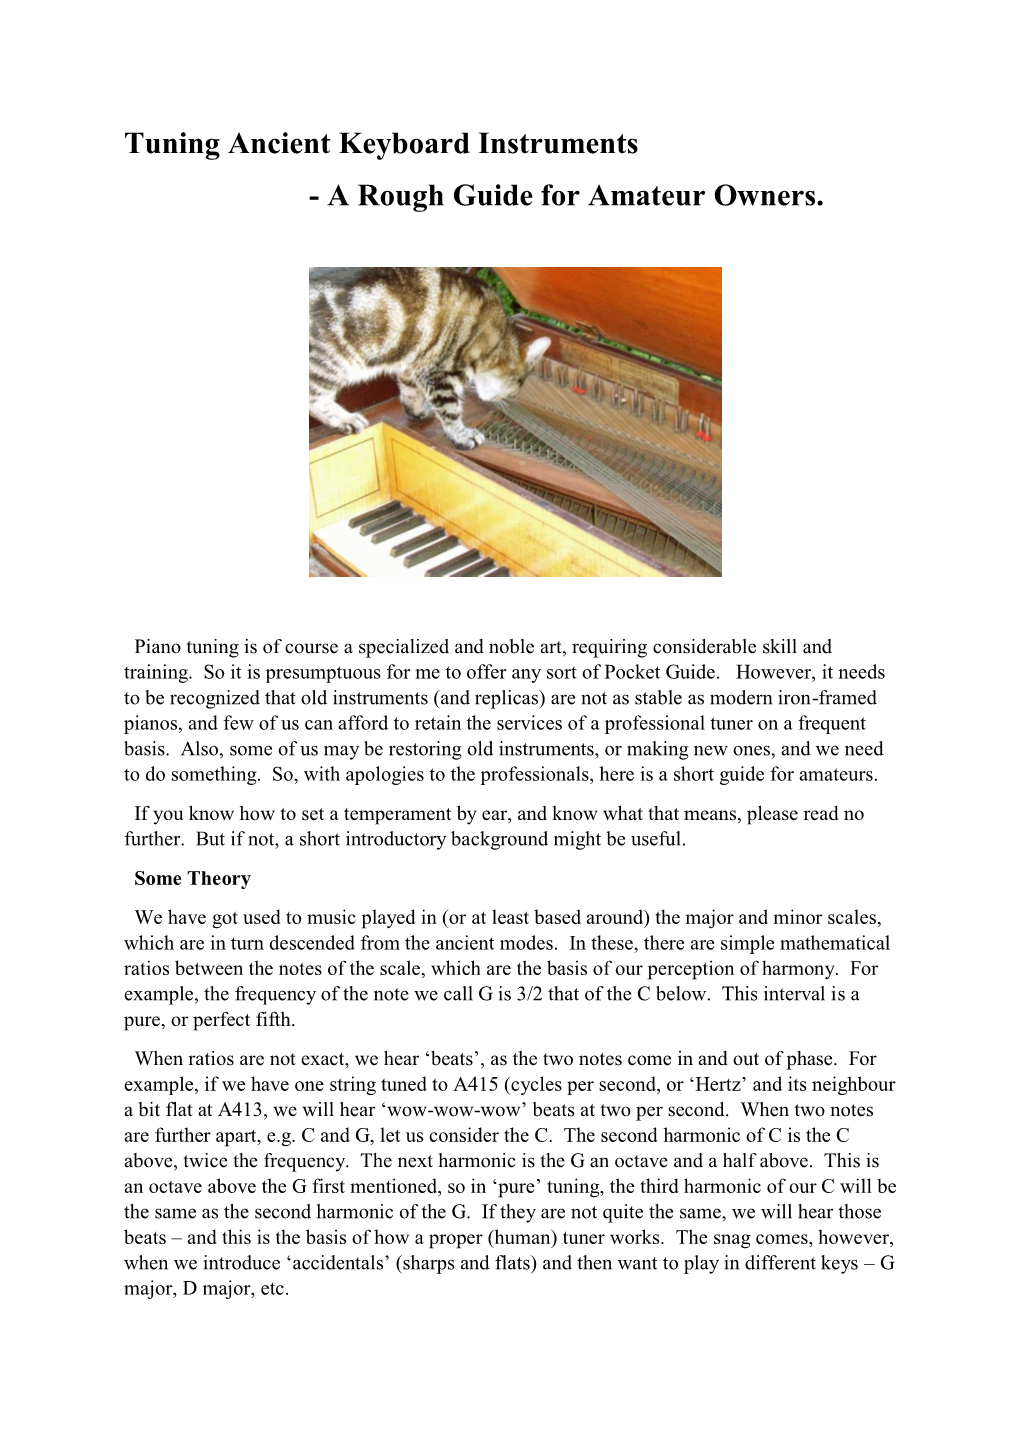 Tuning Ancient Keyboard Instruments - a Rough Guide for Amateur Owners